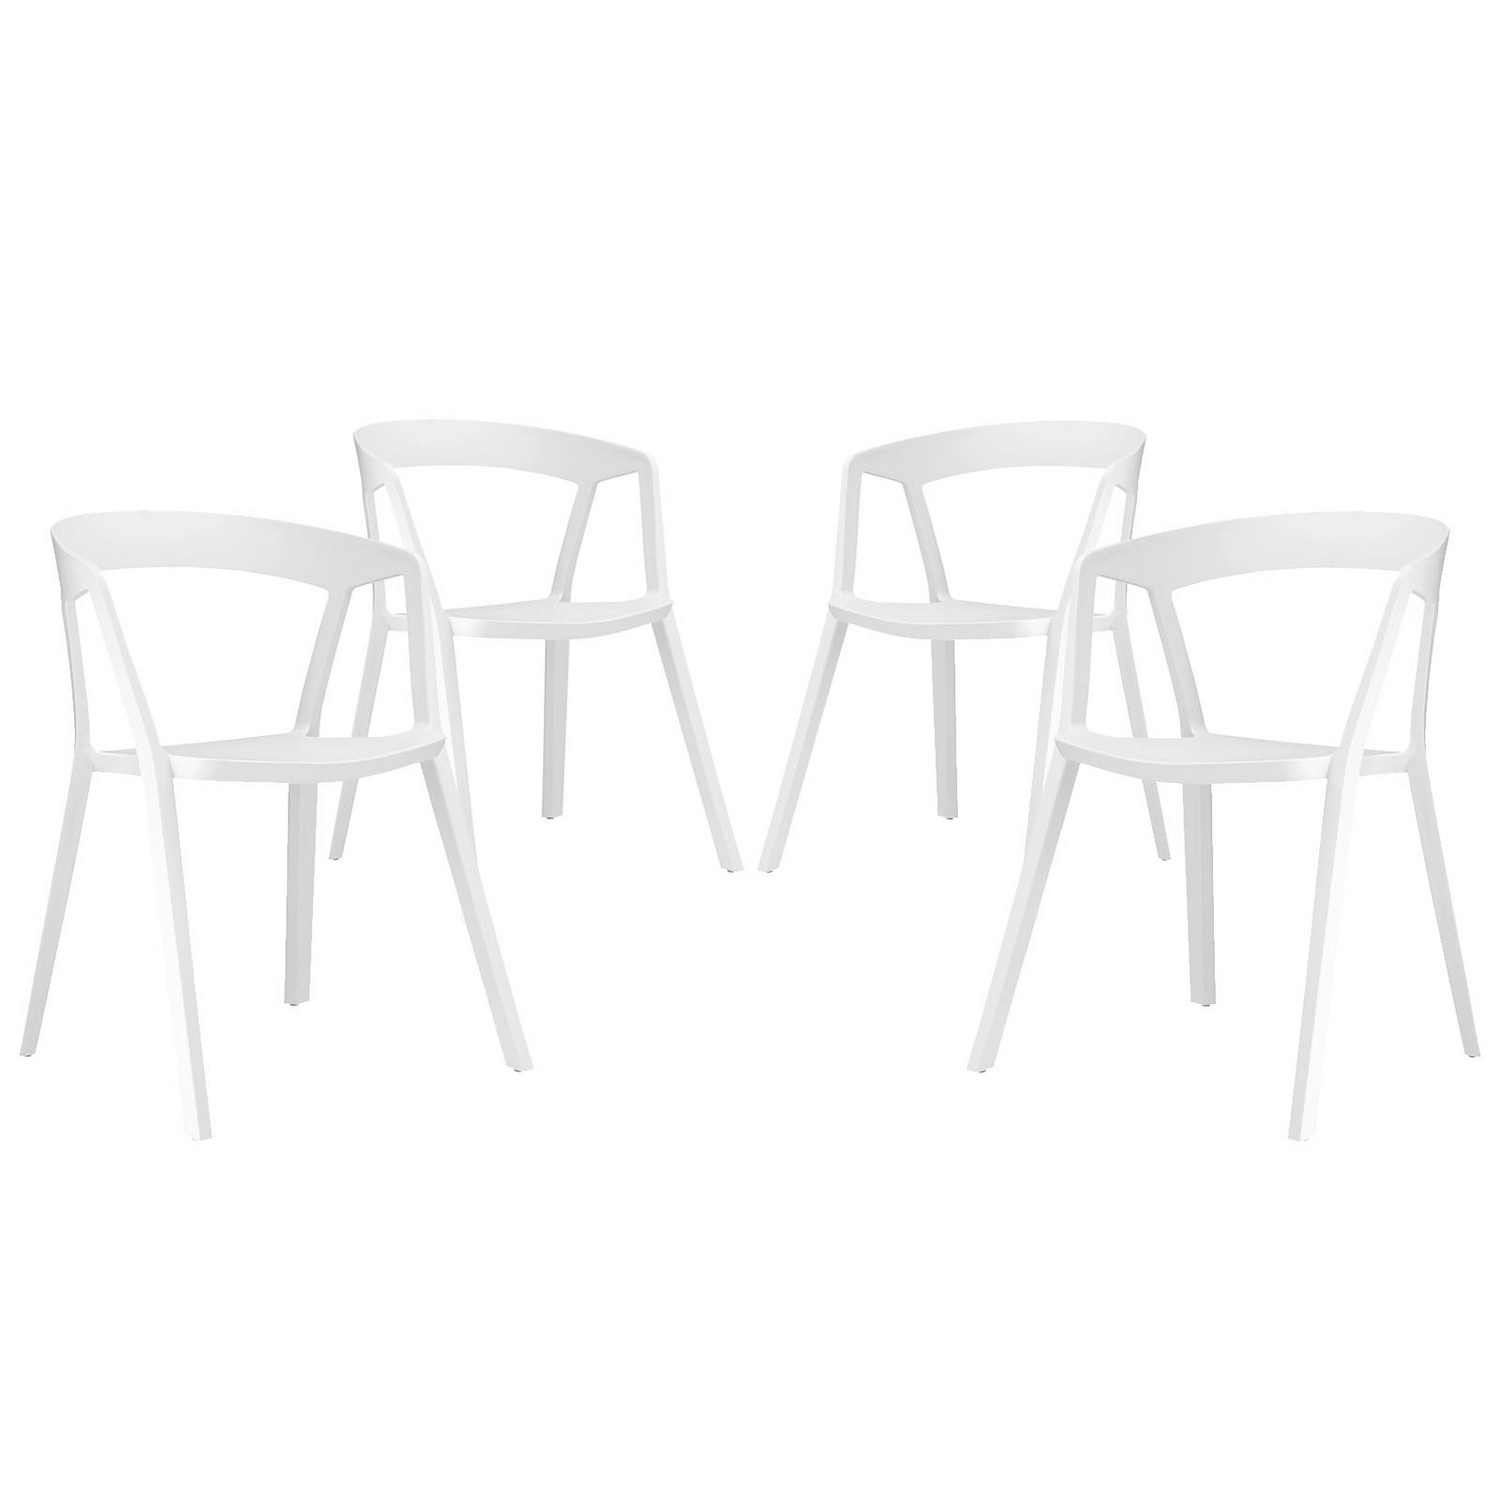 Modway Tread Dining Chair - Set of 4 - White